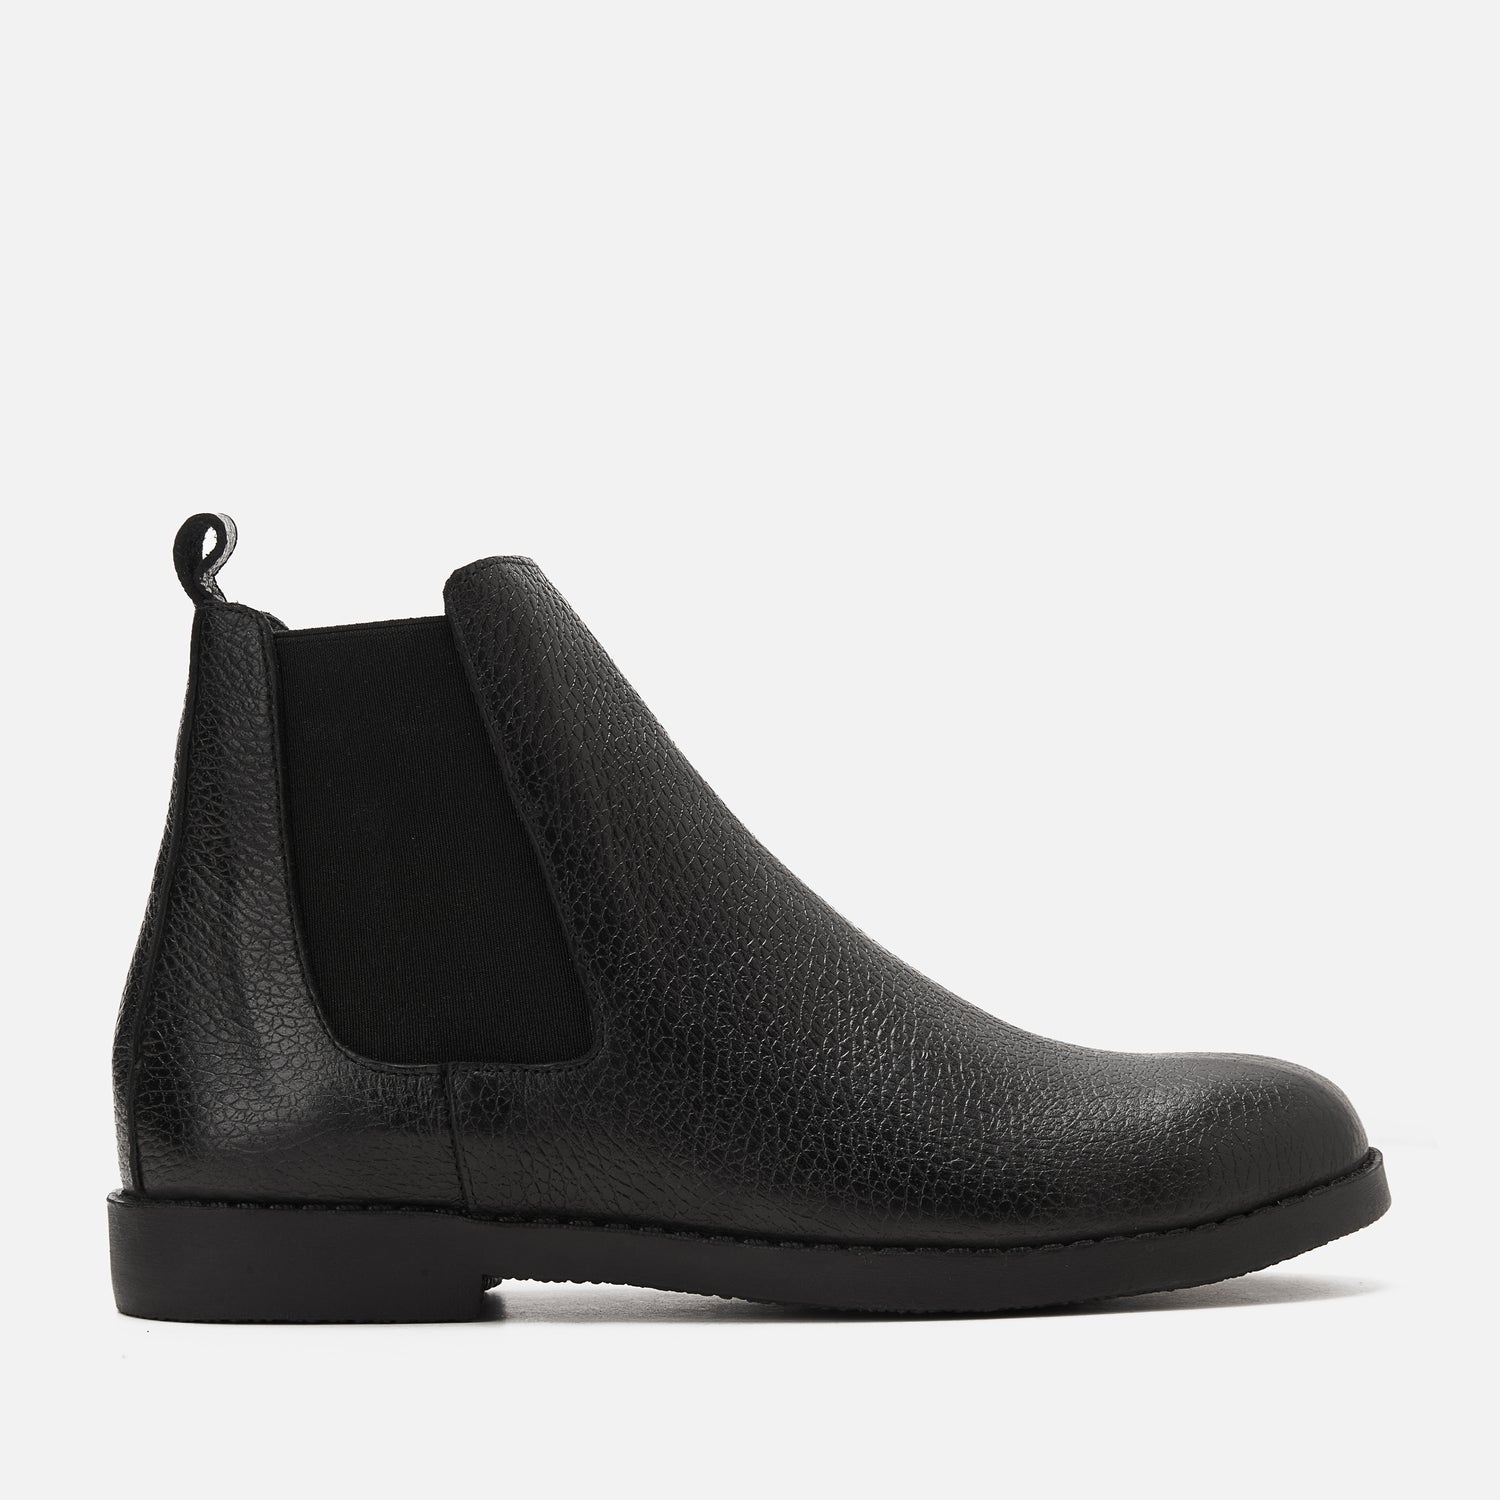 LOAFERS – Loafers